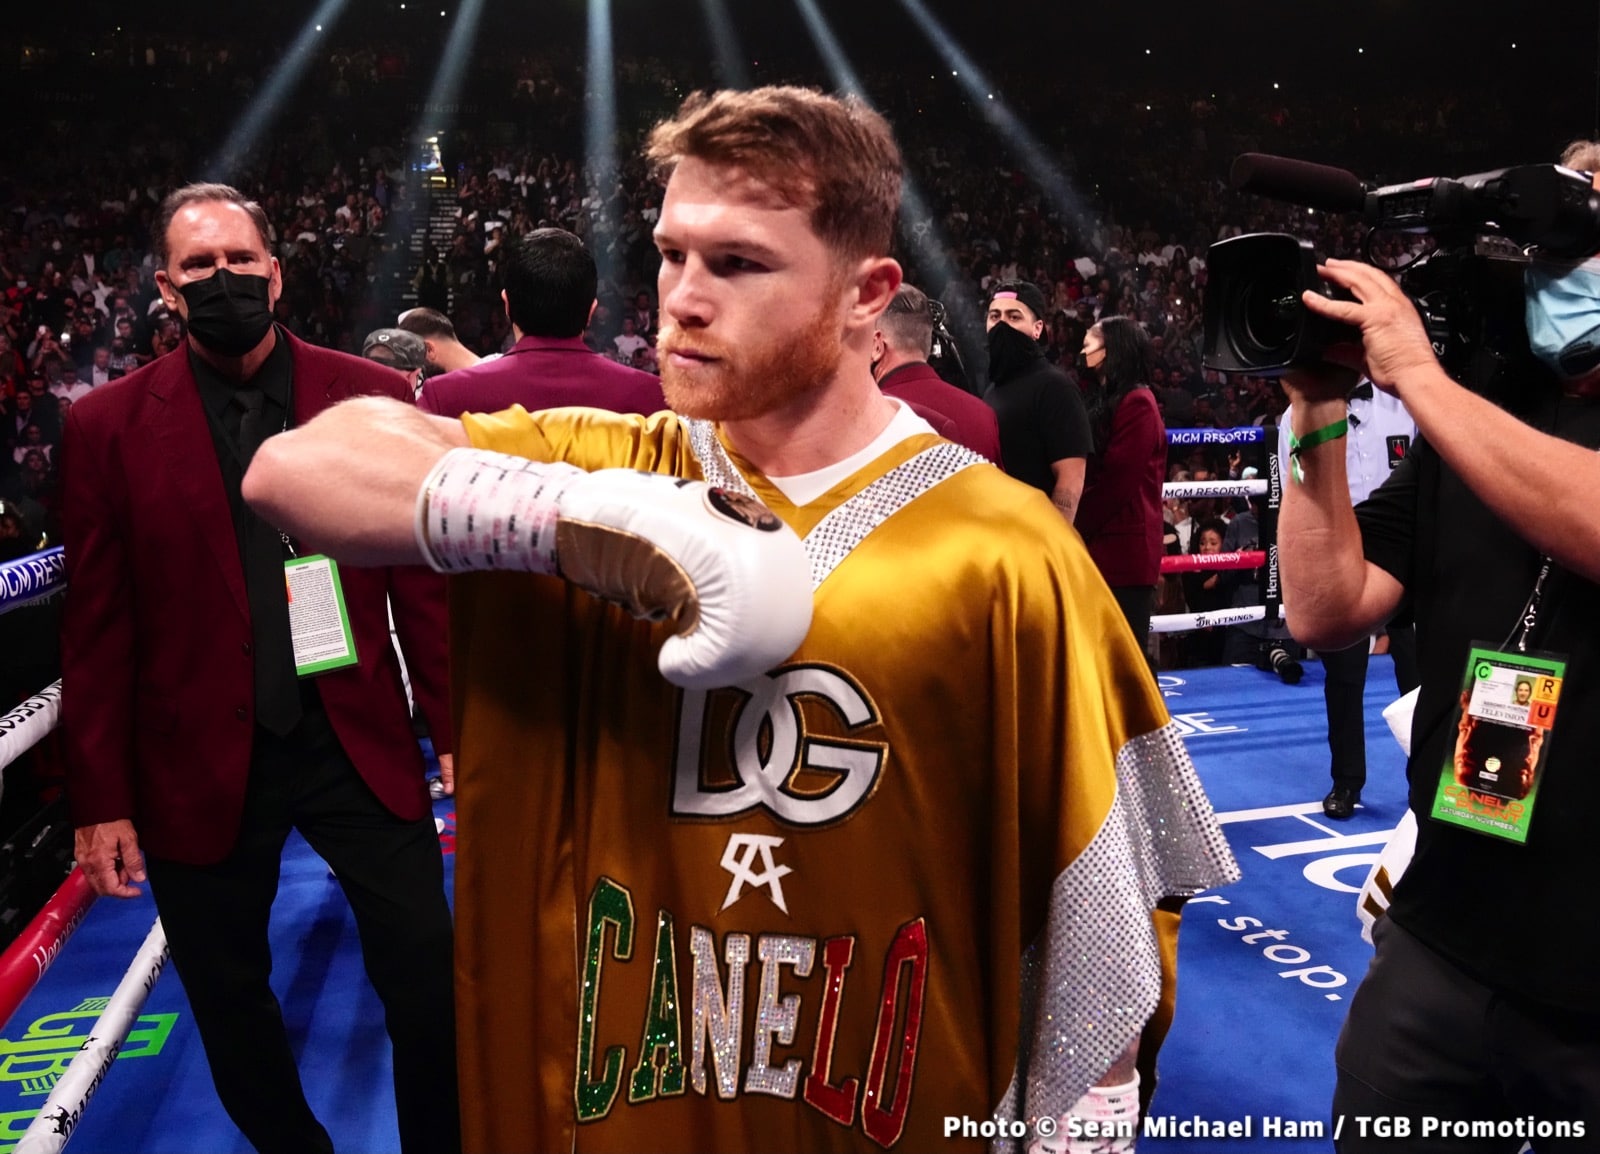 Image: Team Canelo interested in Benavidez or Charlo next says Showtime President